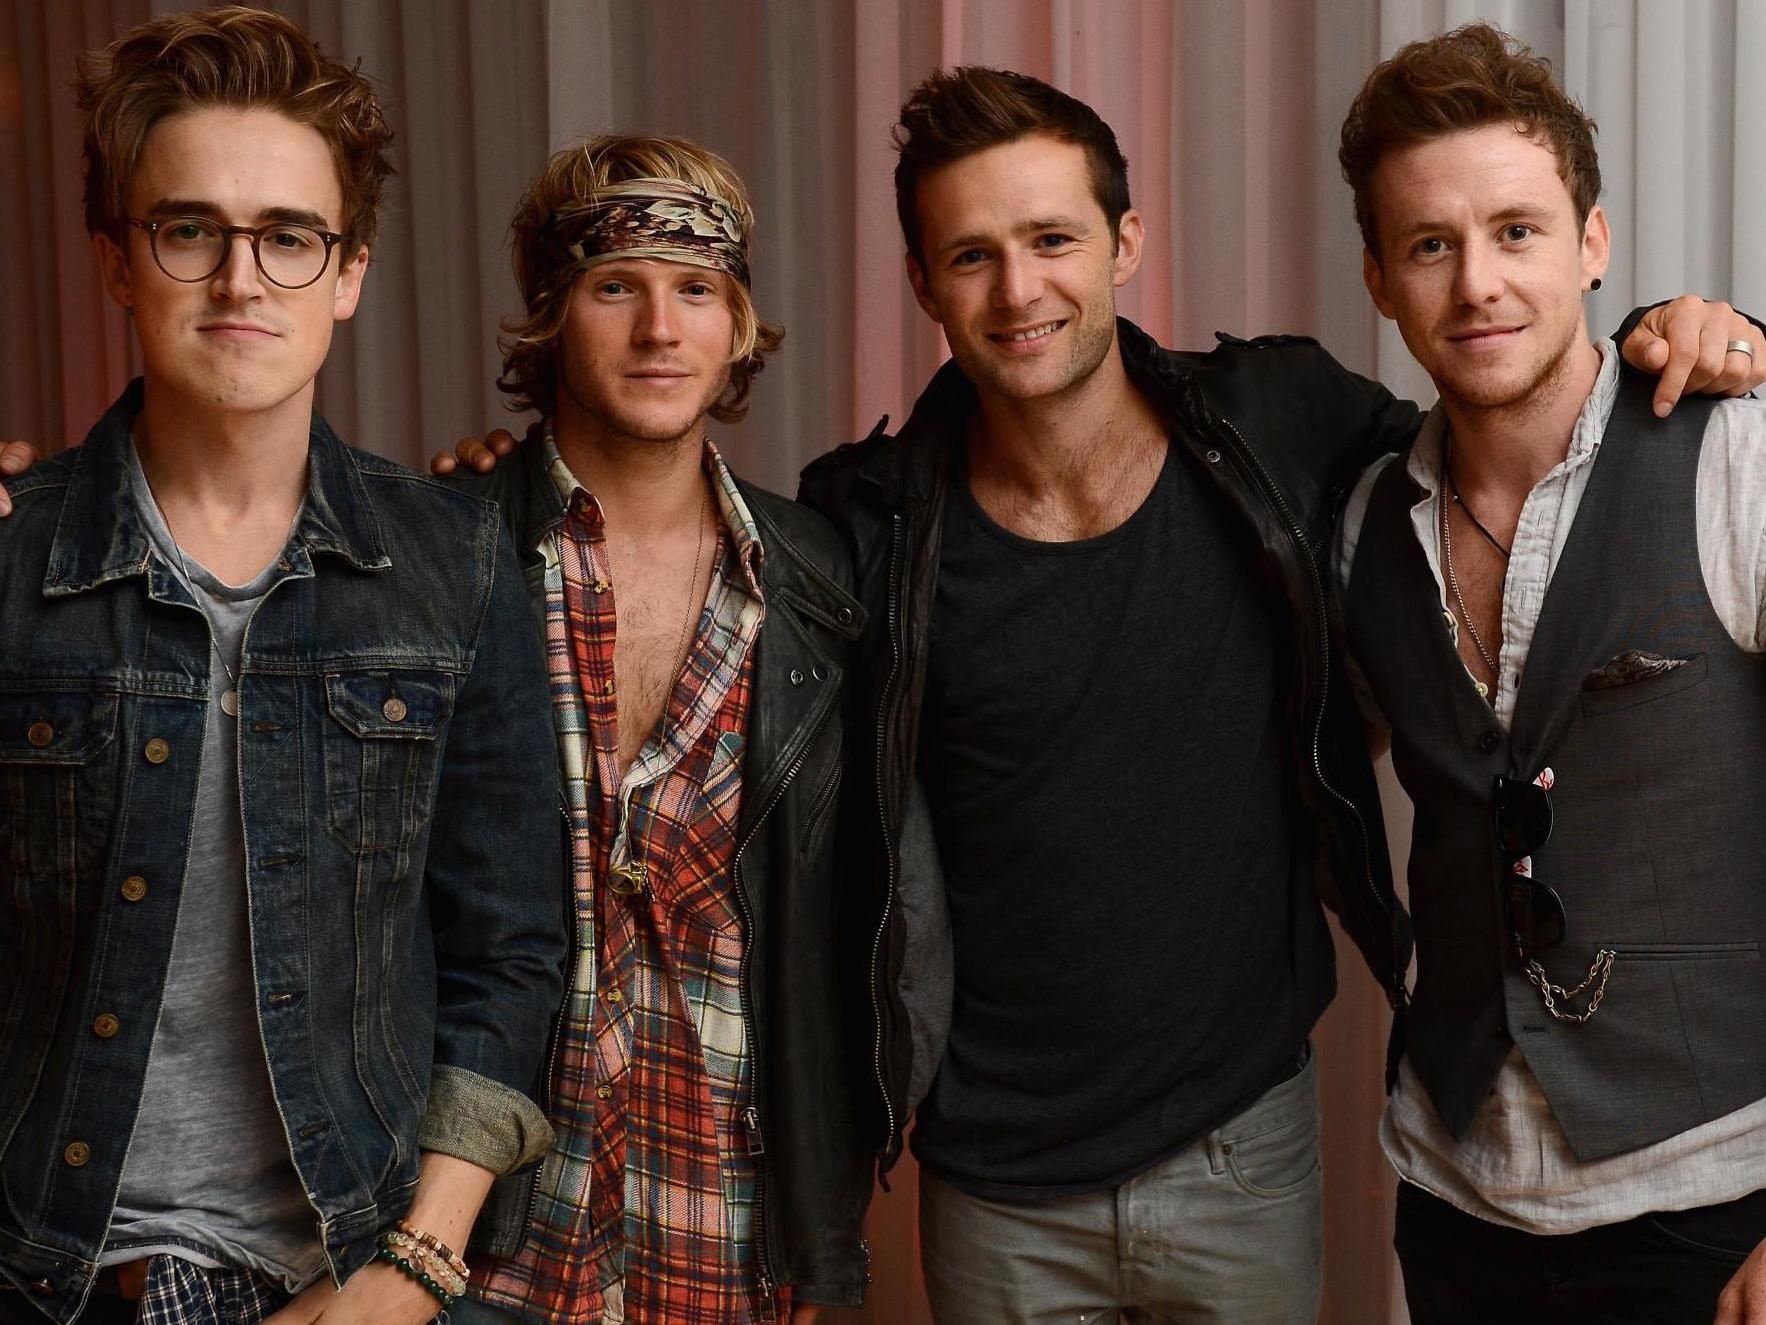 McFly: One Direction song rocks